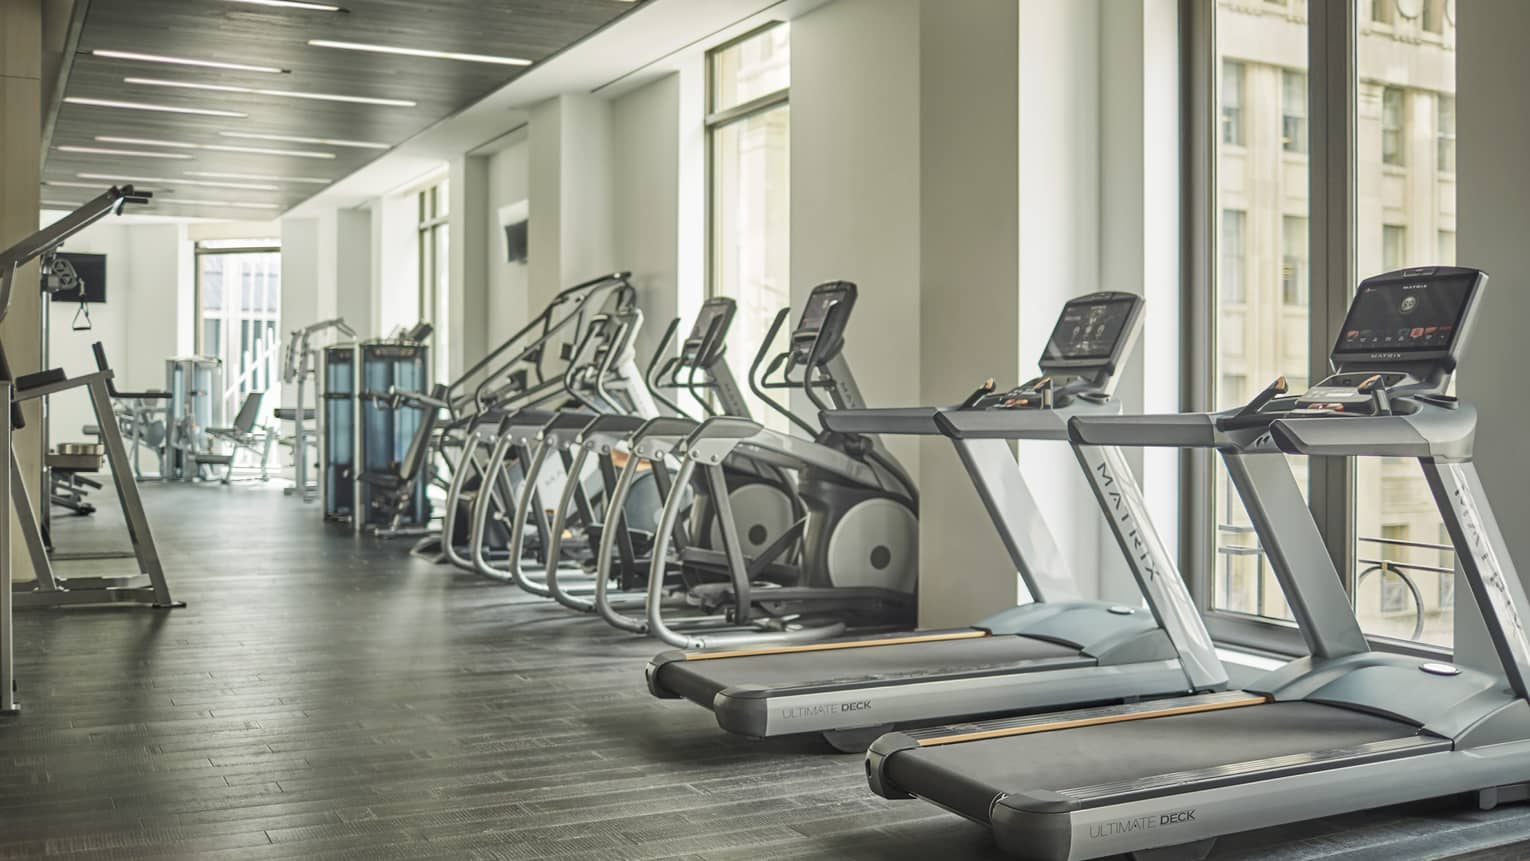 Treadmills, cardio machines in row by windows in Fitness Centre